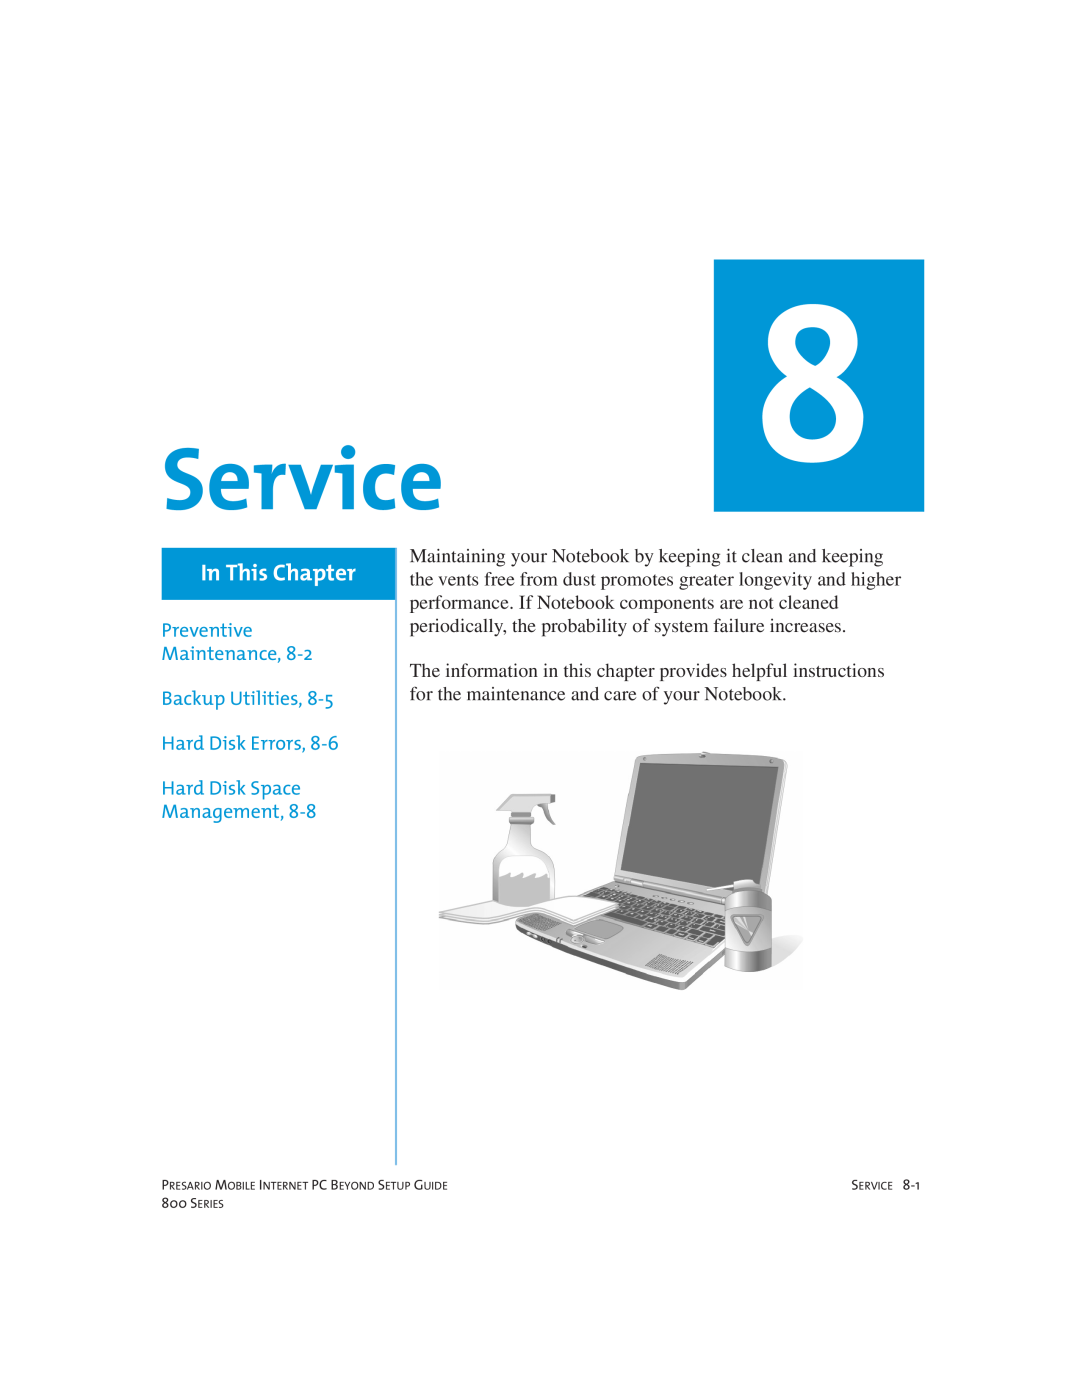 Compaq 800 manual Service, In This Chapter, Preventive Maintenance, Backup Utilities 